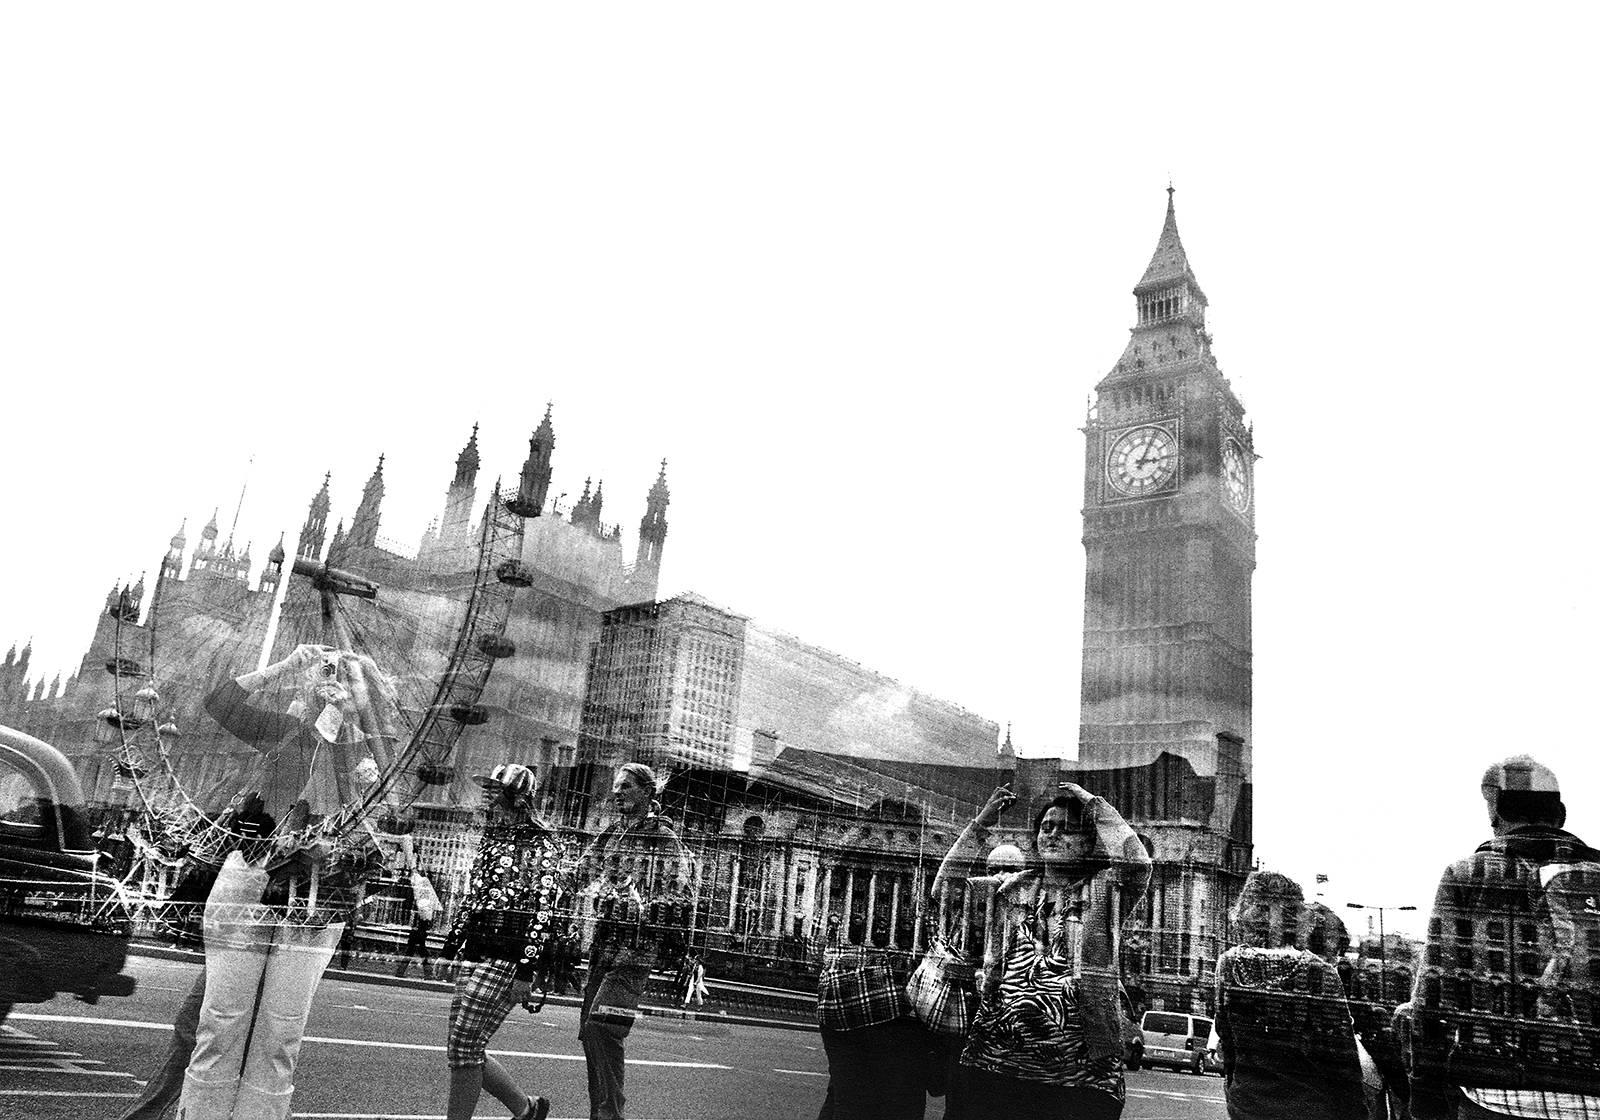 Ricardo Jorge Reis Black and White Photograph - A Day in London 21